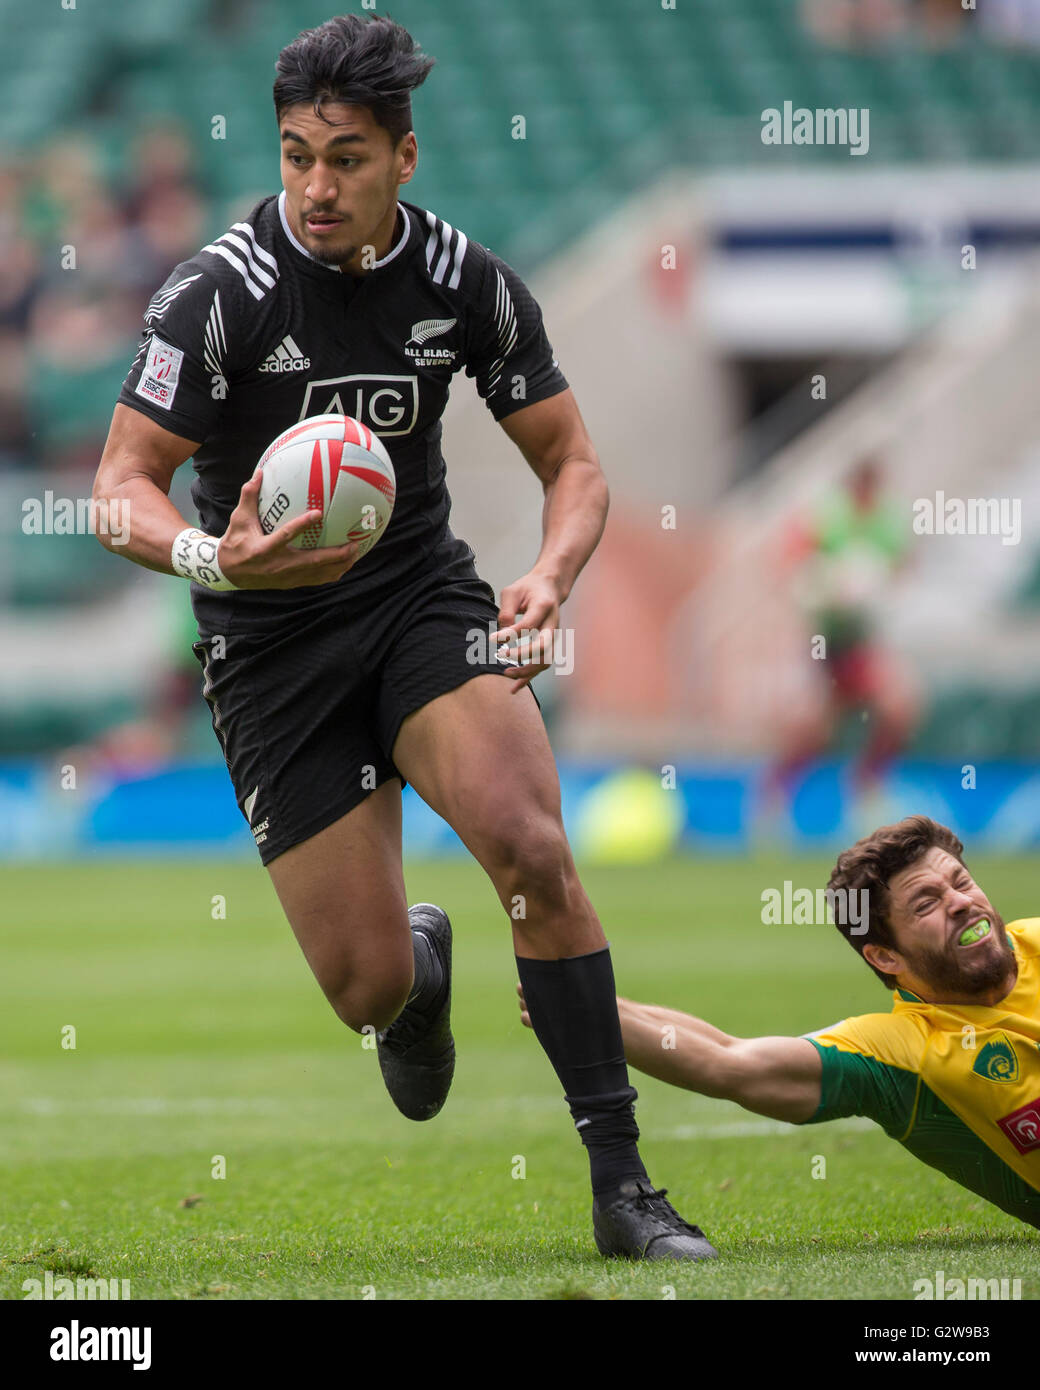 London, Great Britain. 21st May, 2016. Rieko Ioane (New Zealand) and Martin Schaefer (Brasil) in action during the HSBC London Sevens rugby tournament match New Zealand vs. Brasil in London, Great Britain, 21 May 2016. Photo: Juergen Kessler/dpa - NO WIRE SERVICE -/dpa/Alamy Live News Stock Photo